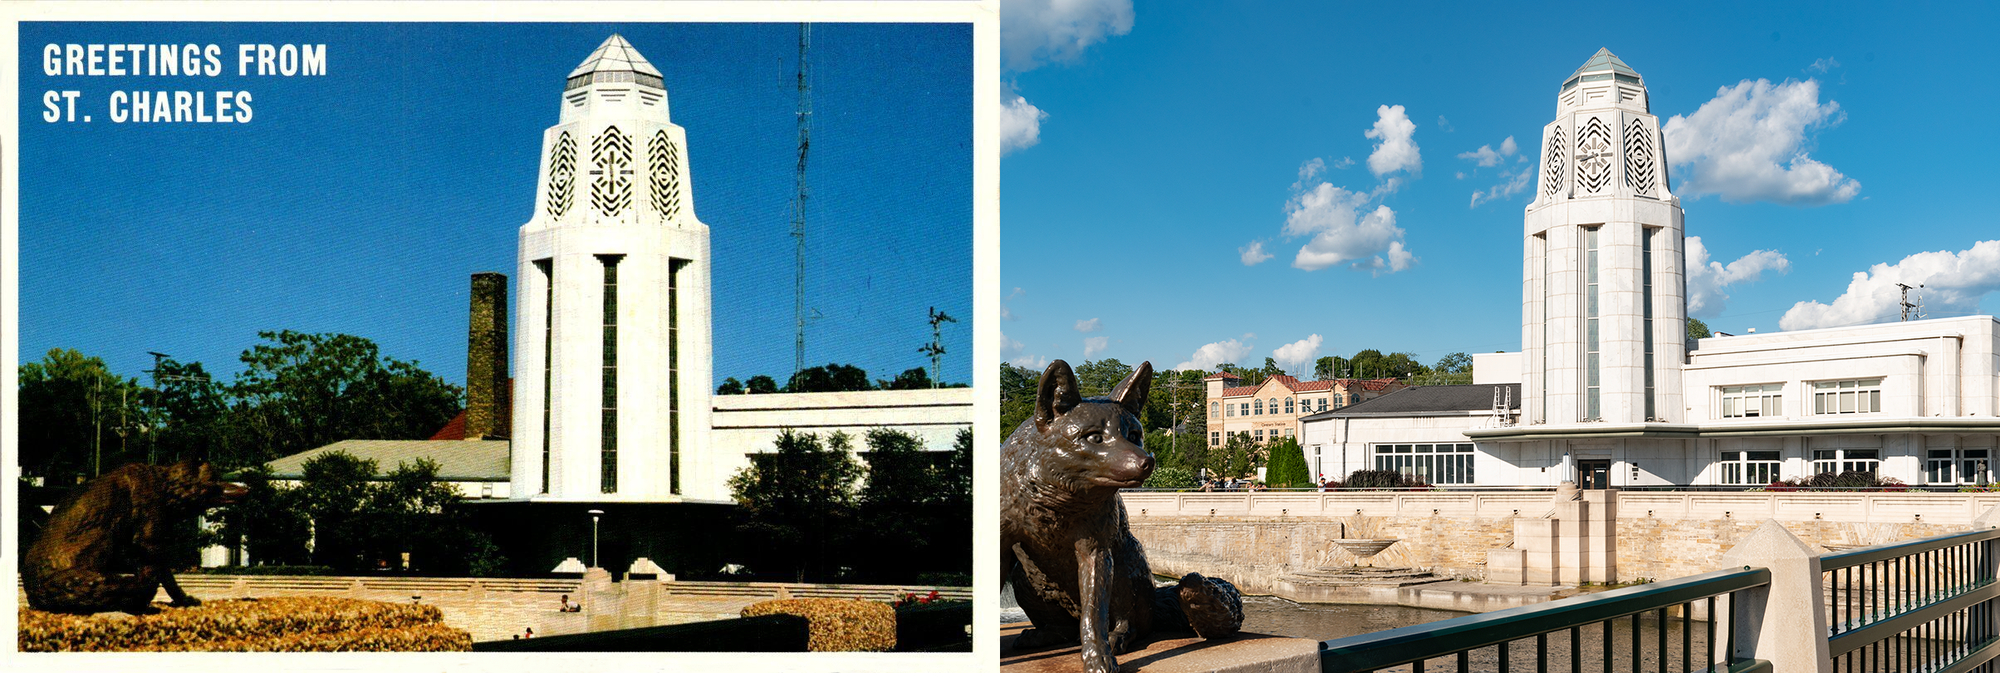 Photo postcard on the left with a bronze fox statue in the foreground and a smokestack to the left of the tower. On the right, a 2021 photo: the fox is facing a different direction and the smokestack is gone.